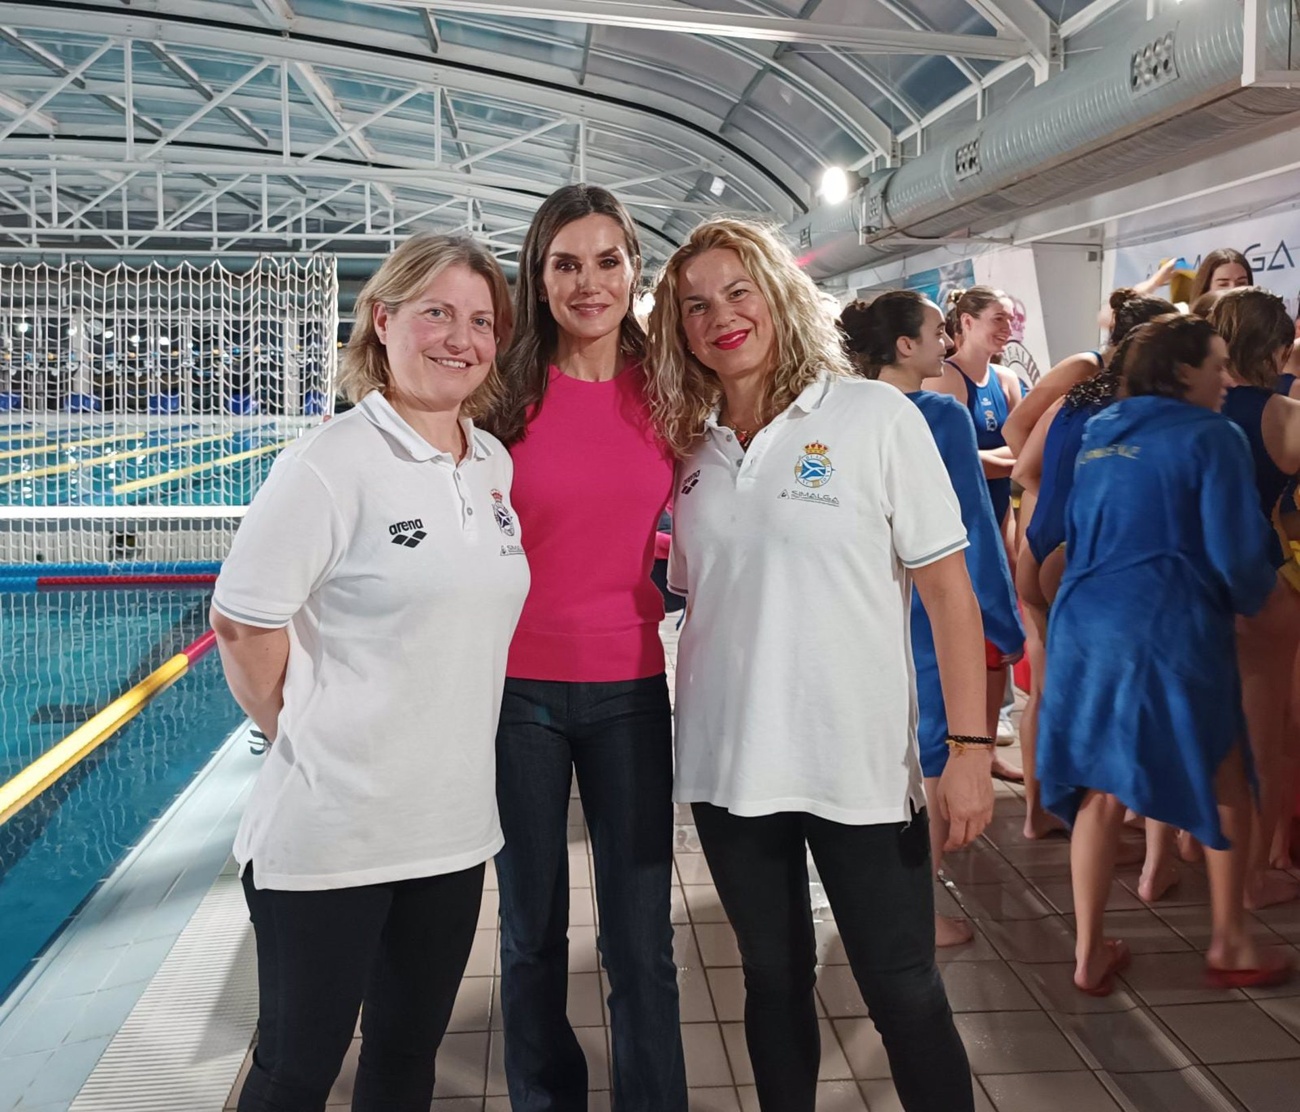 Queen Letizia shows her support for women’s water polo in Madrid while King Felipe skis with his friends in Sierra Nevada